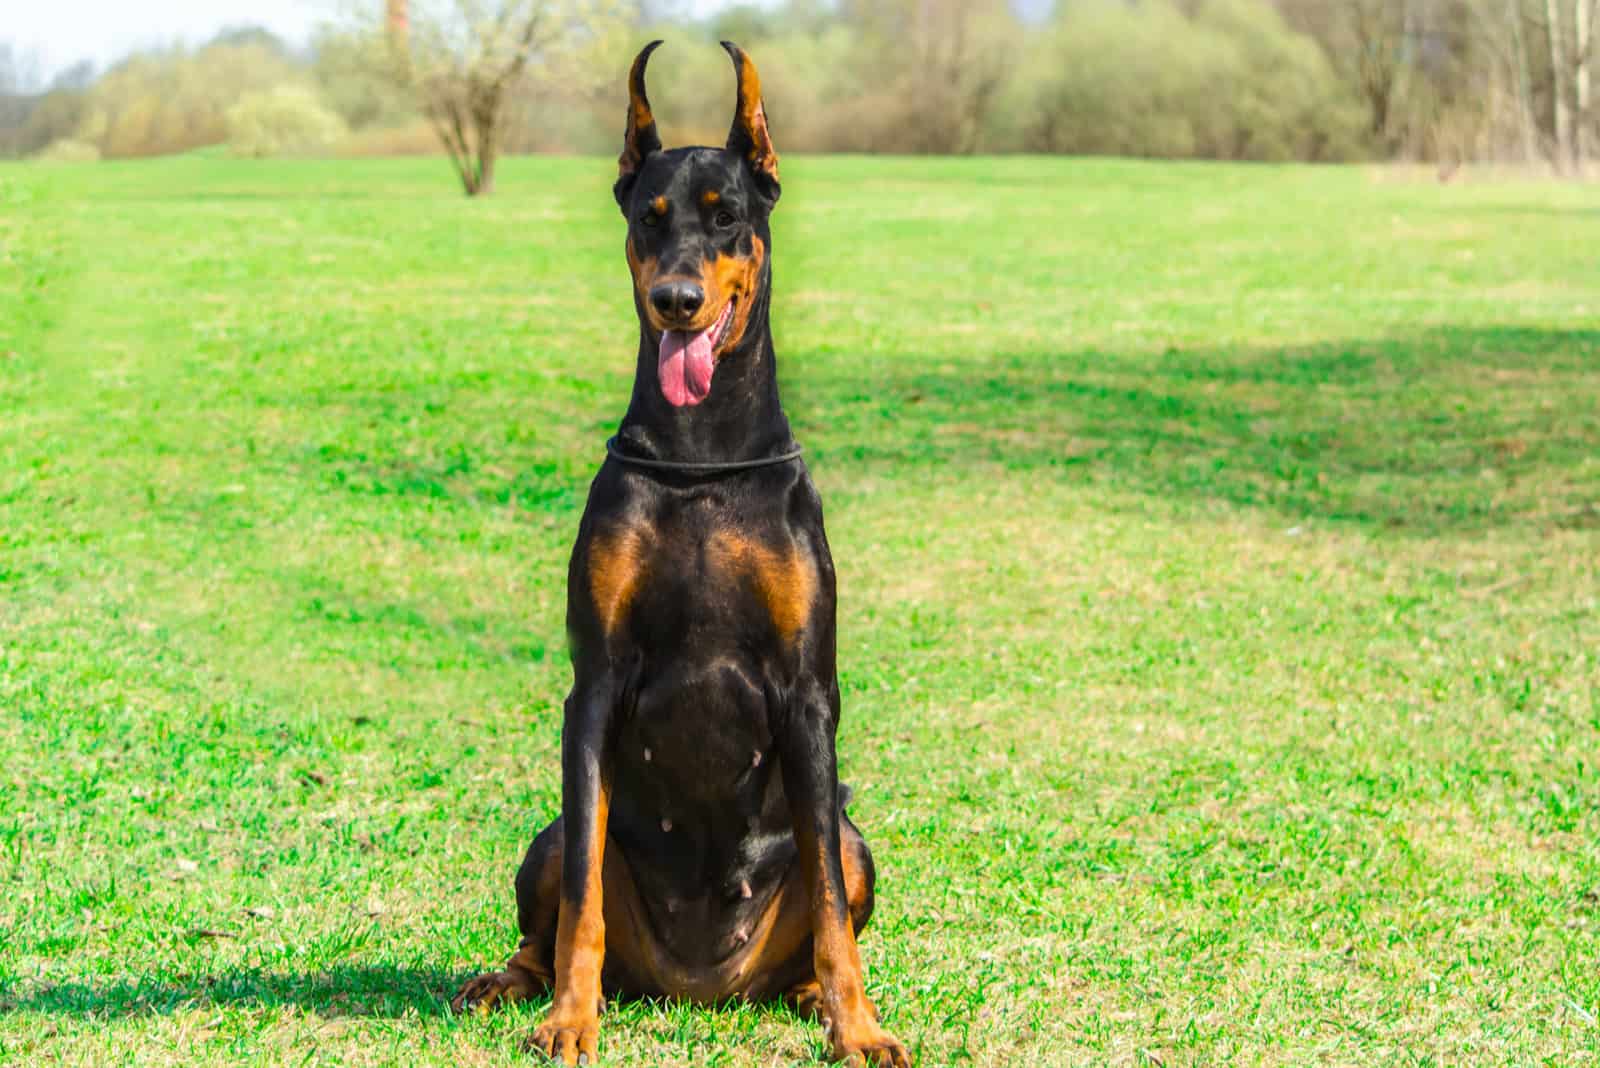 the doberman is sitting on the grass